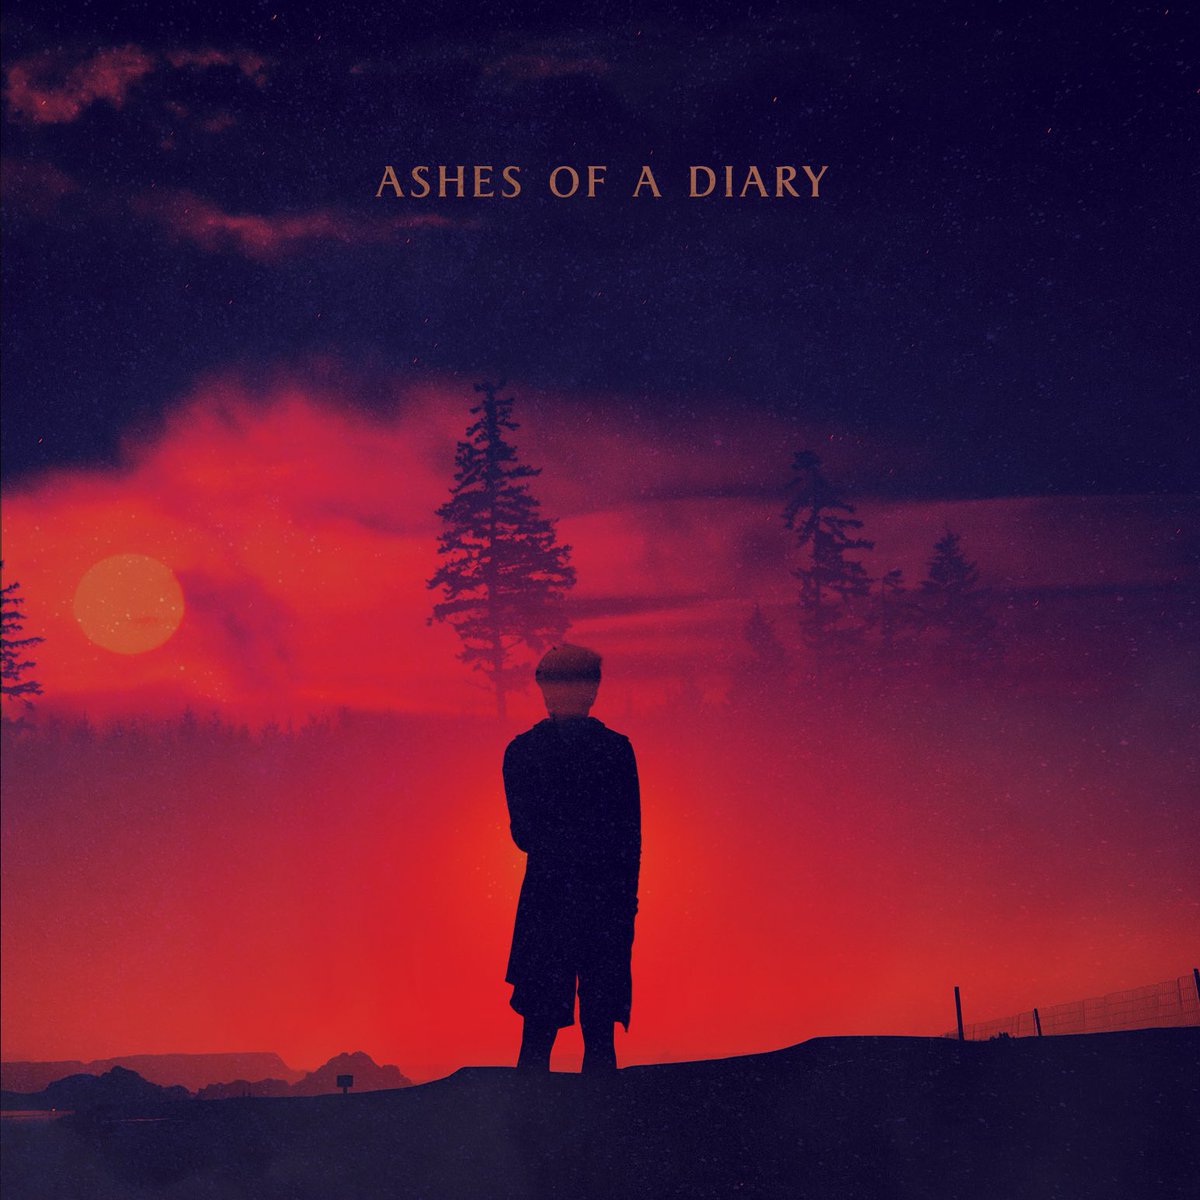 Ashes of a Diary was released exactly one year ago today! Since then, we’ve hit just shy of 100k streams and have shipped and sold CDs in Europe and North America! We want to thank you for your endless support! Stay tuned for exciting updates soon!